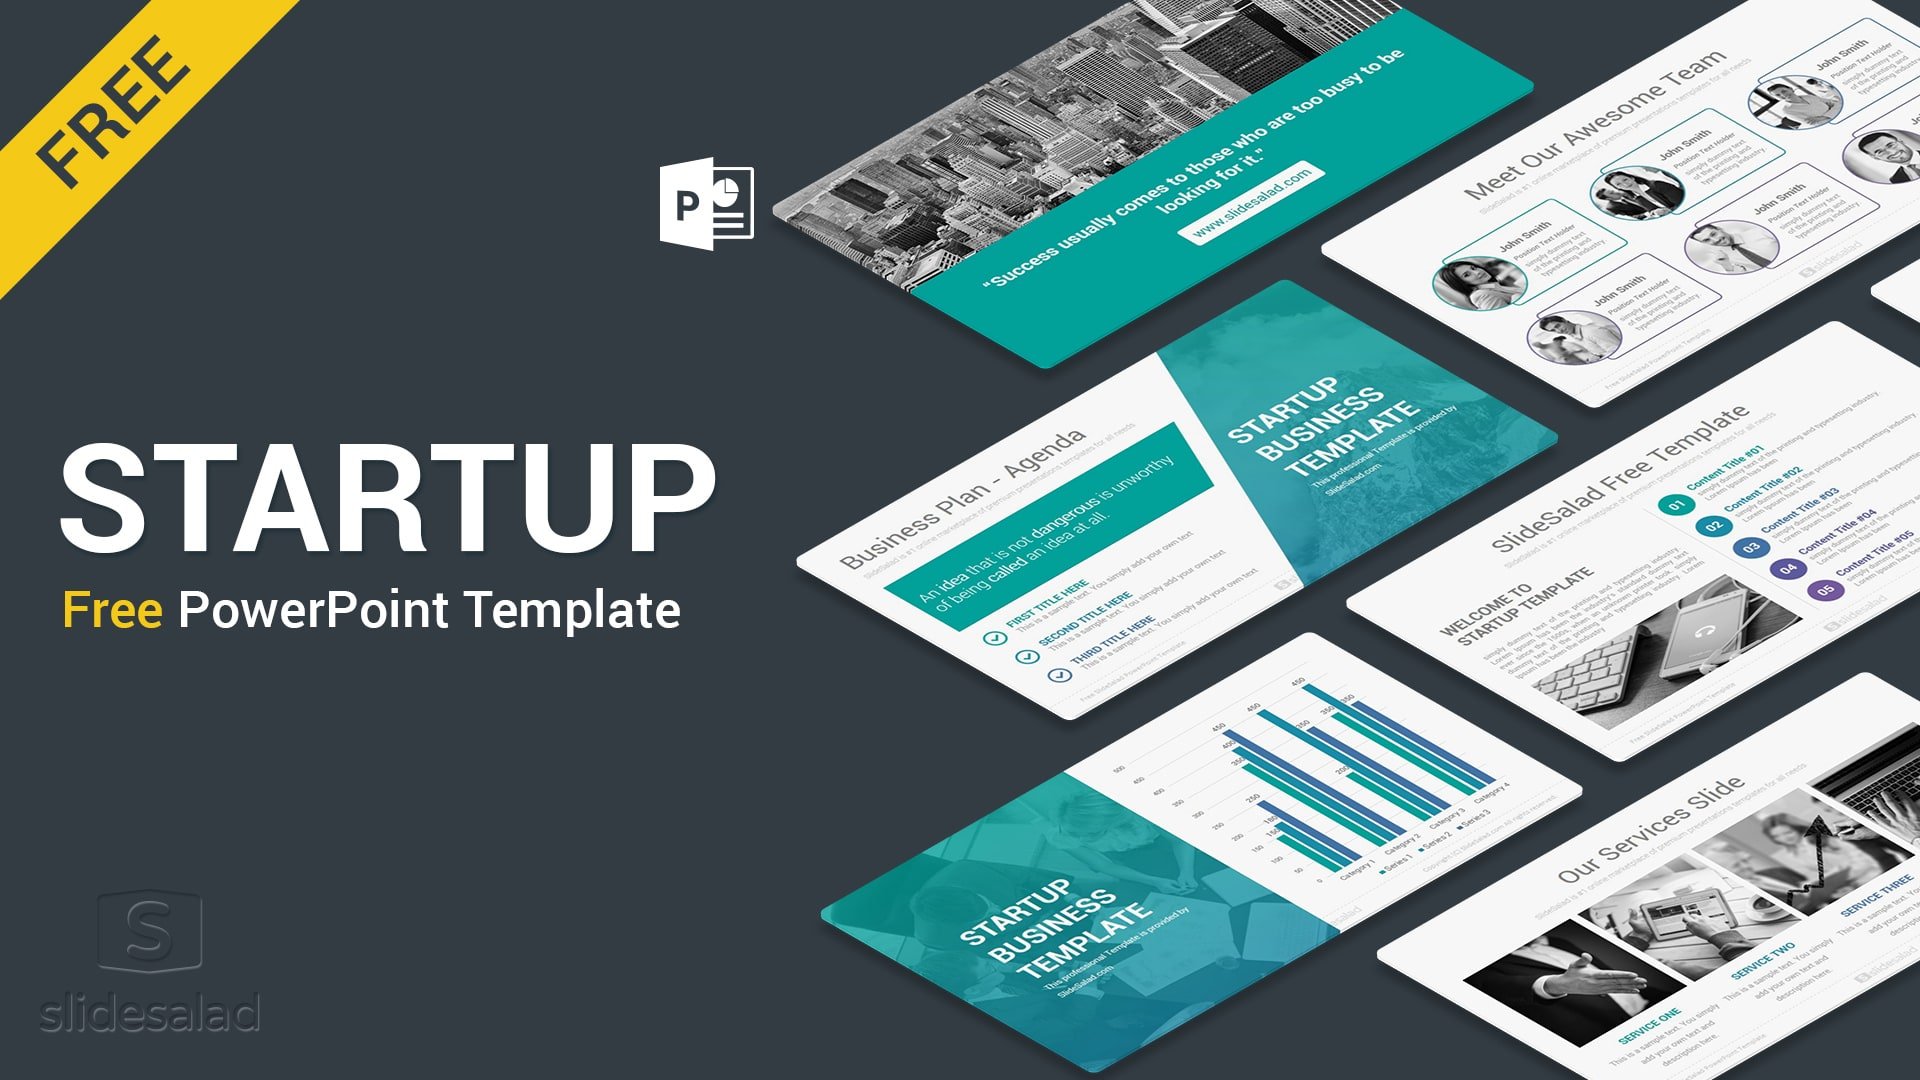 Business Proposal PowerPoint Template